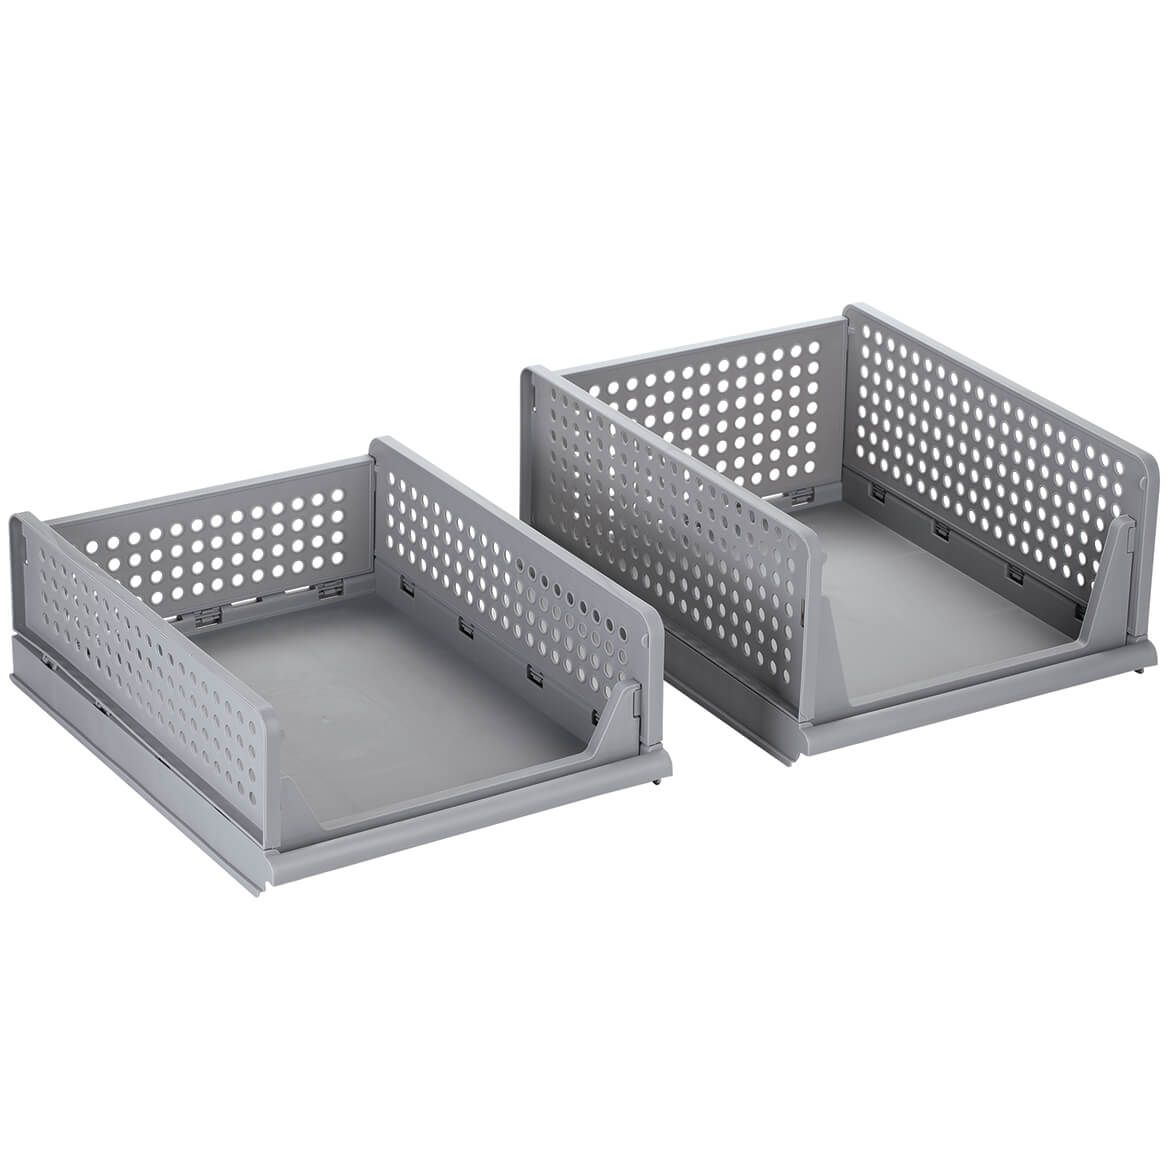 My Home™ Stacking Storage Baskets, Set of 2 + '-' + 372255